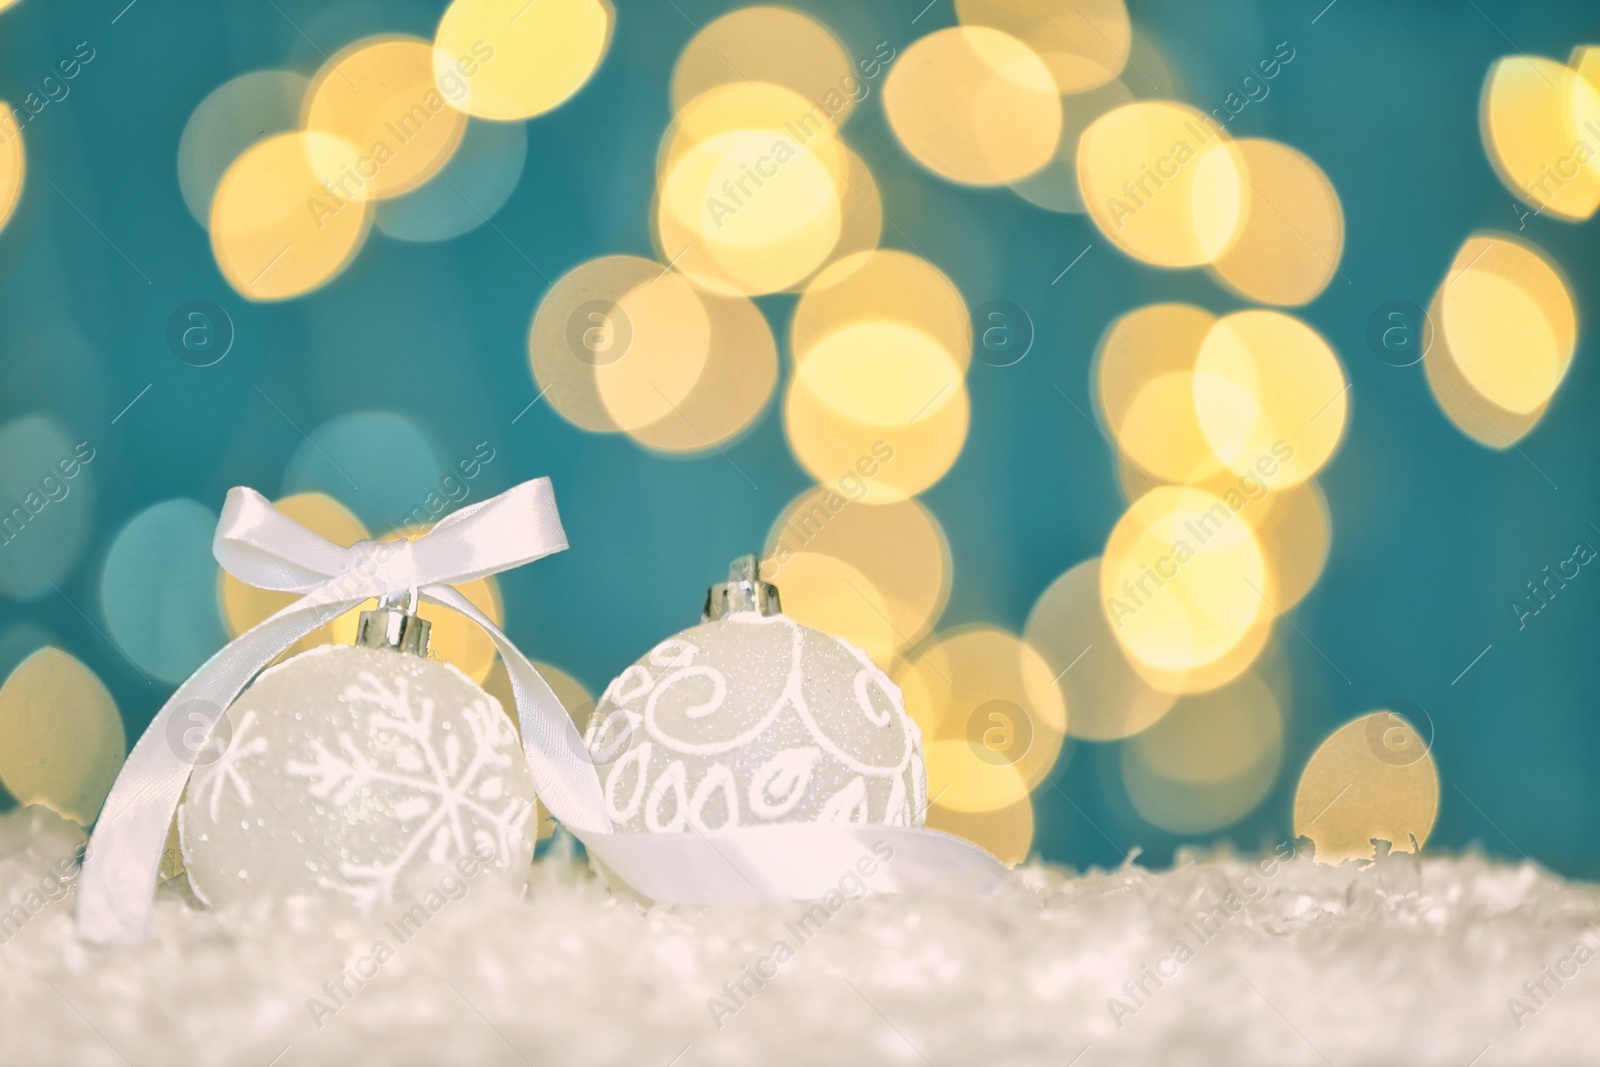 Photo of Beautiful white Christmas balls on snow against blurred festive lights, space for text